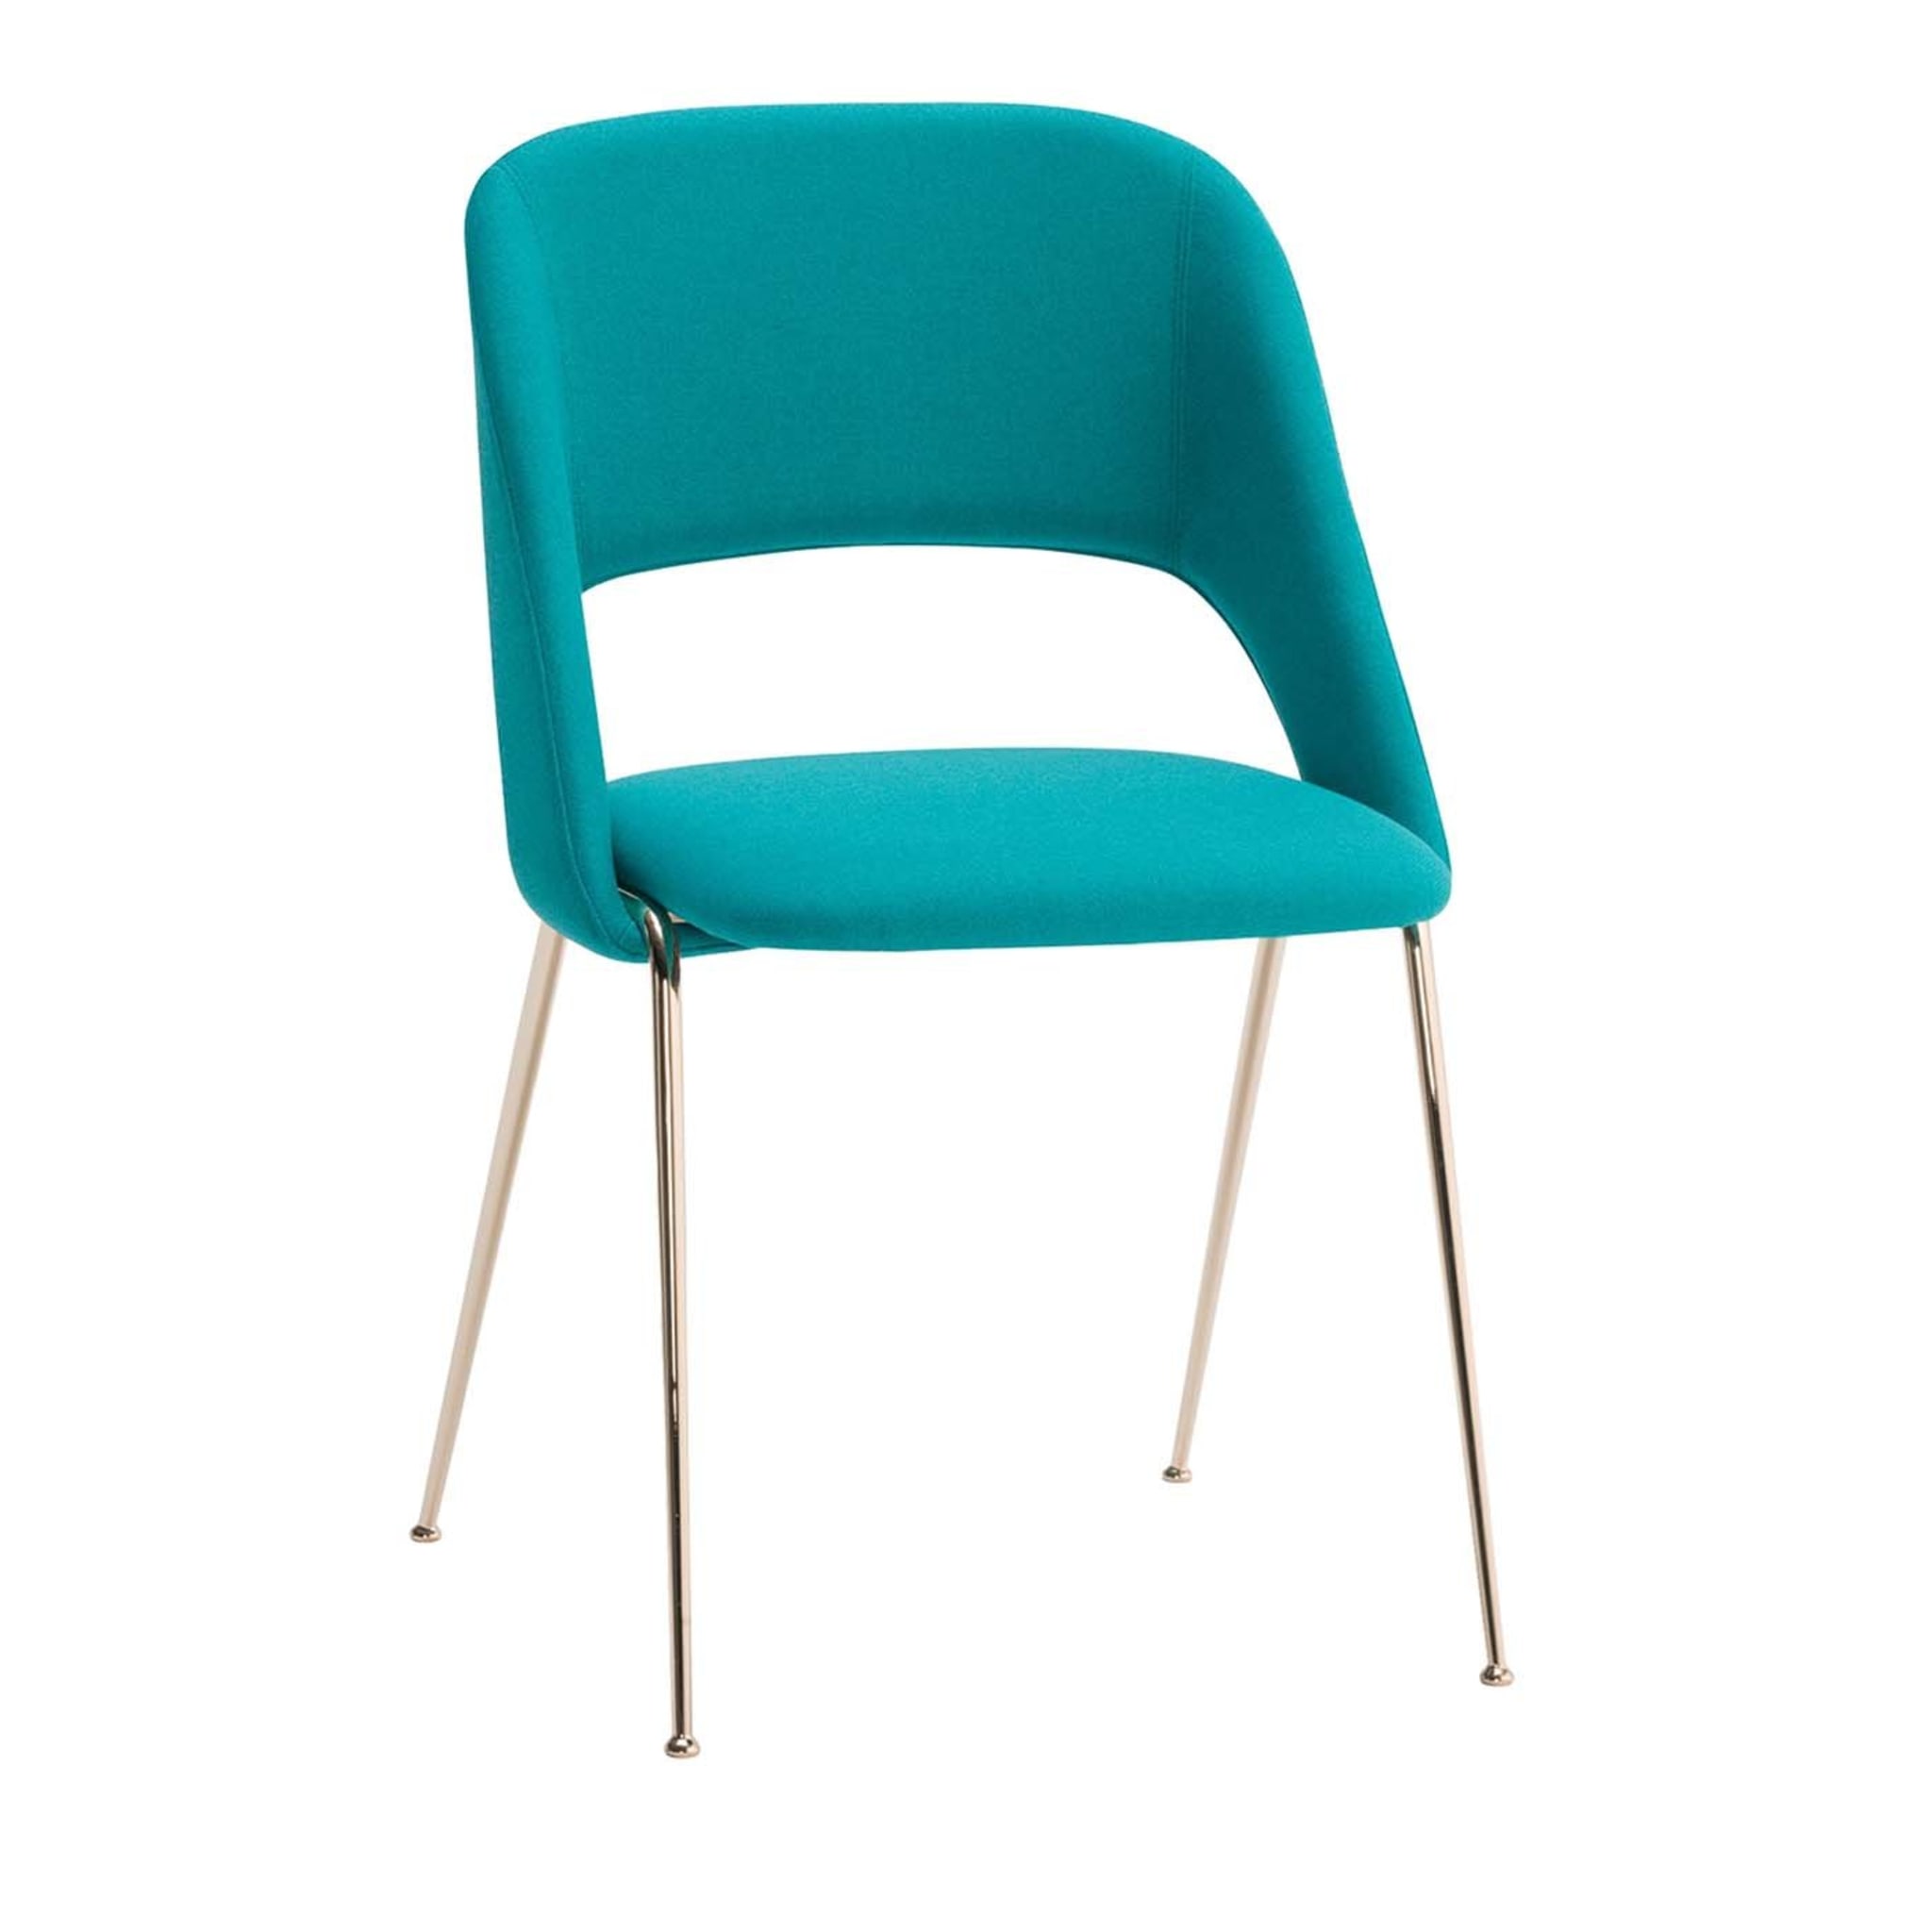 Set of 4 Delice Turquoise Chairs - Main view